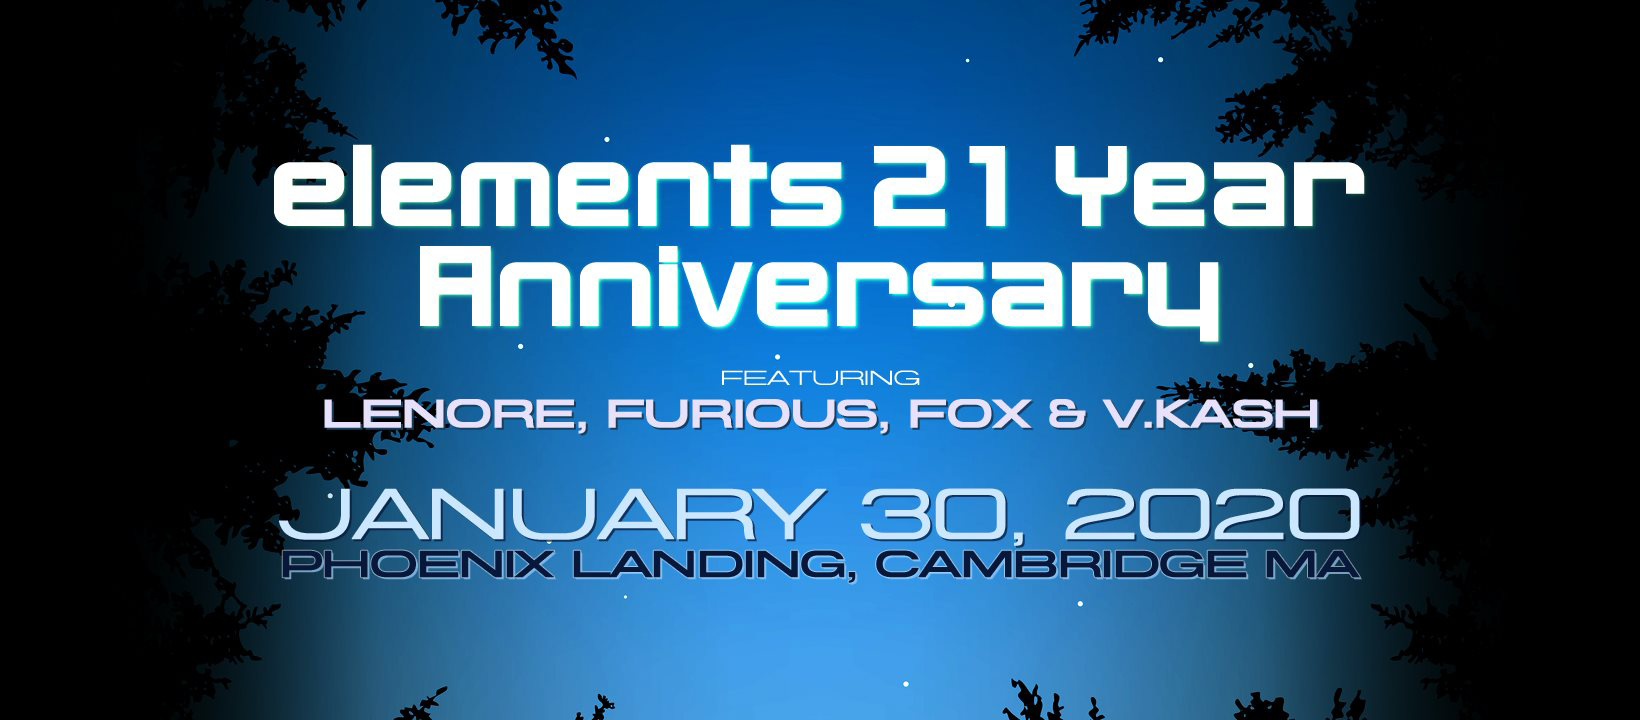 Elements 21 year anniversary, January 30th, 2020 at The Phoenix Landing